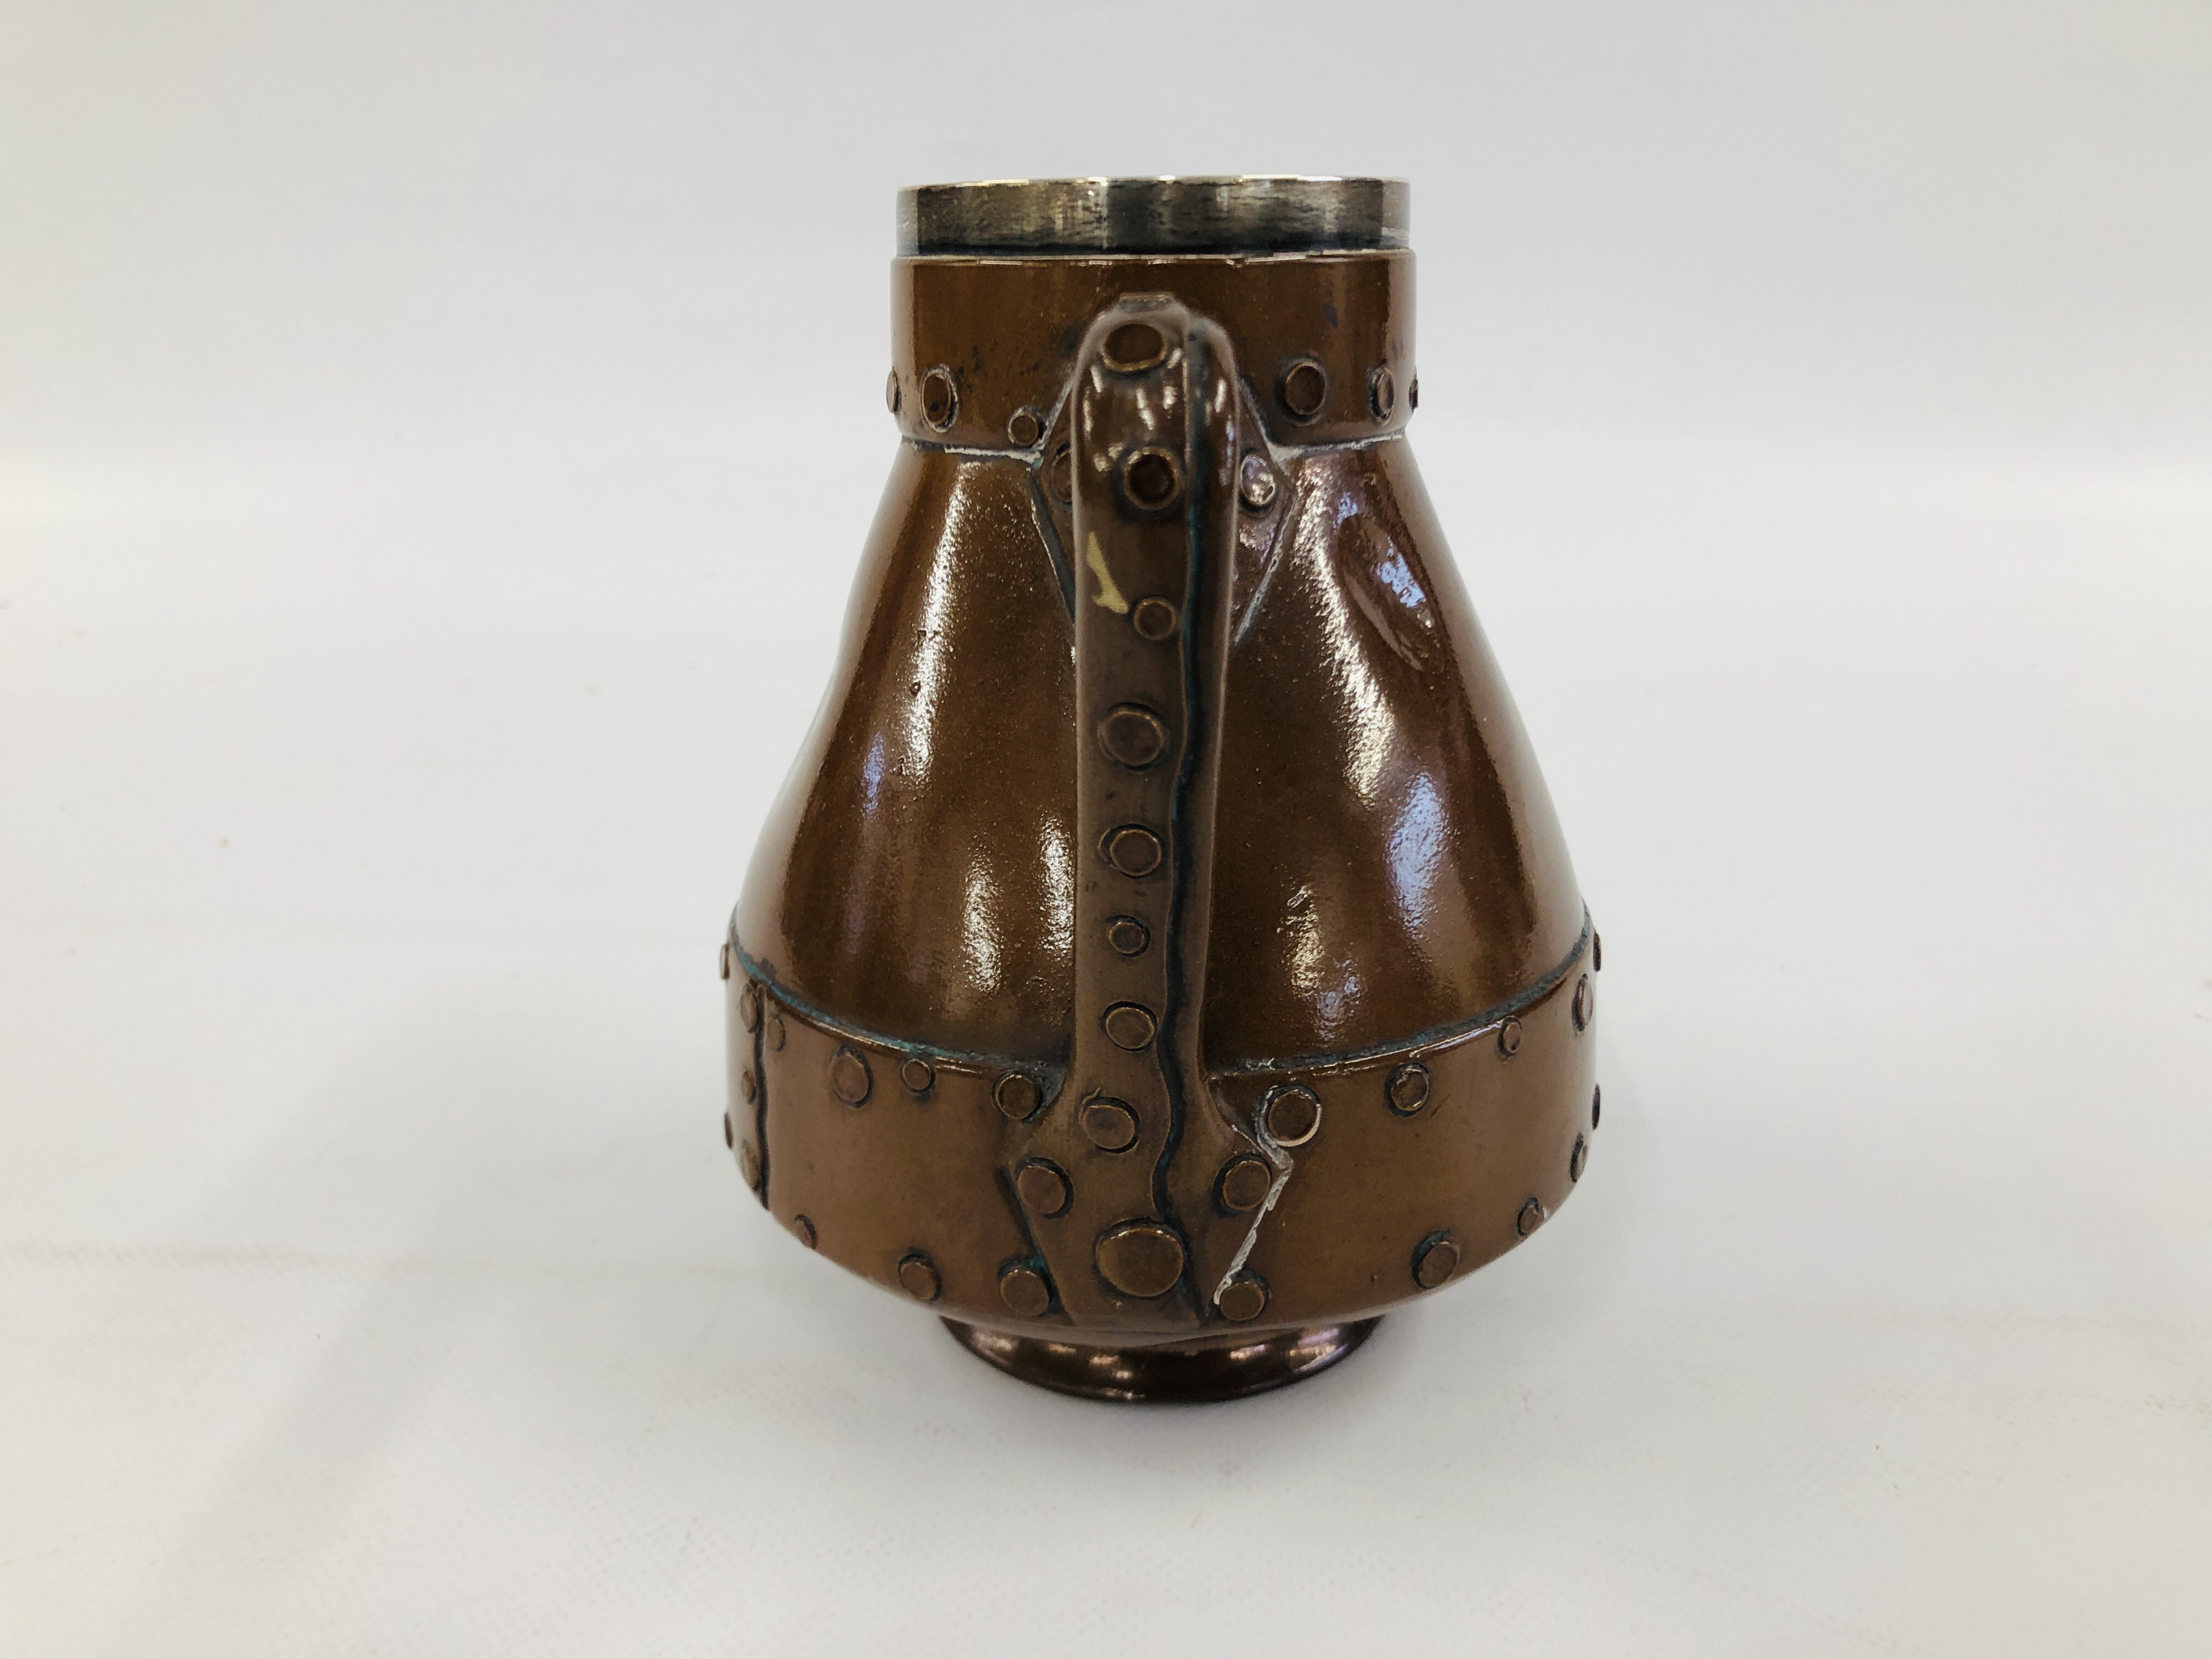 A DOULTON LAMBETH ARTS & CRAFT SILICON ENGLAND 9281 JUG IN THE GLAZED COPPER STYLE WITH SILVER RIM - Image 6 of 7